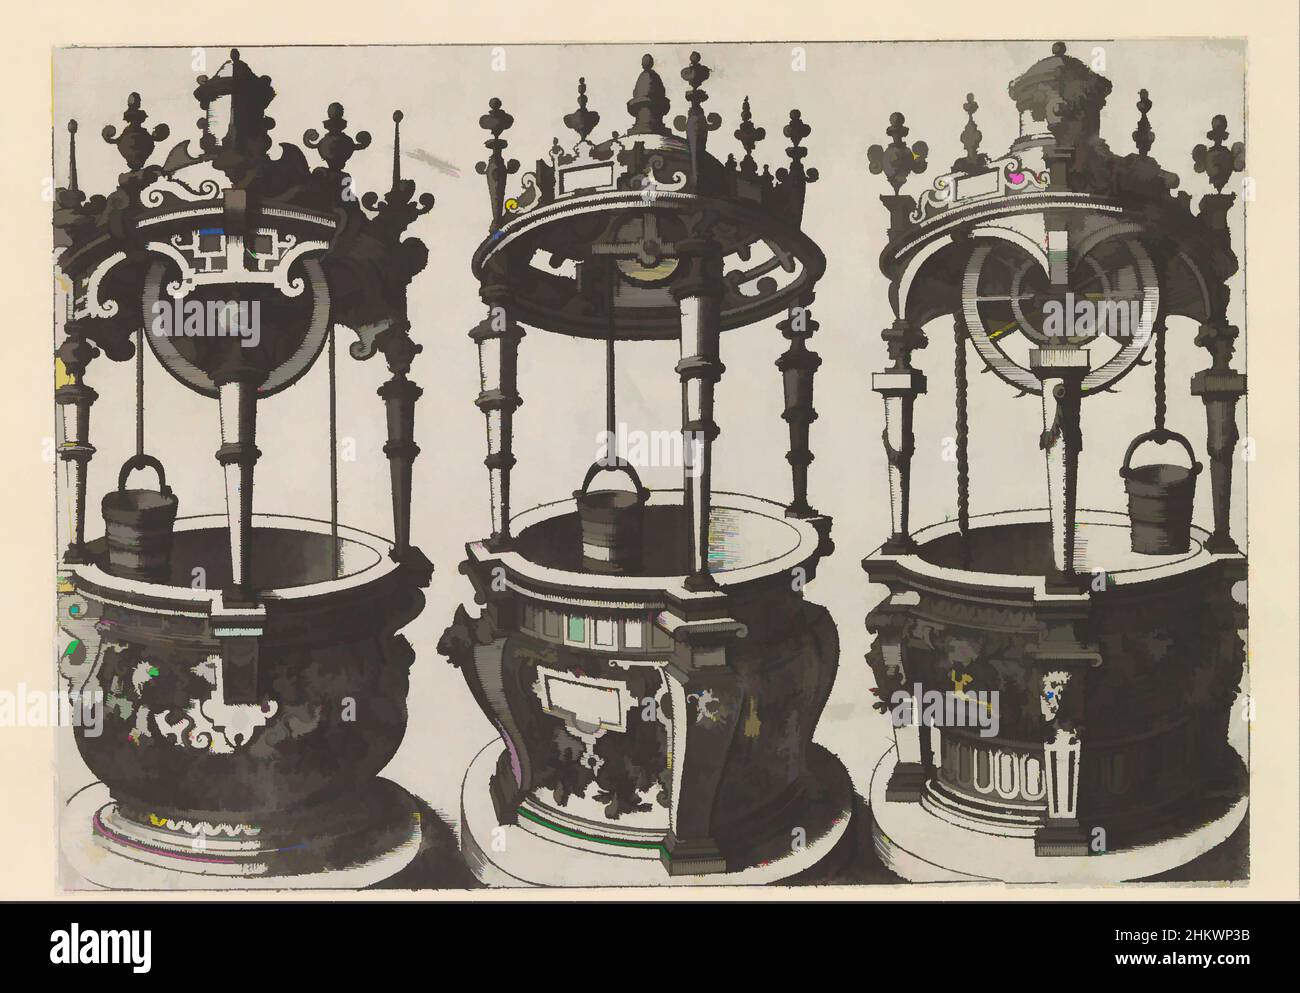 Art inspired by Three round wells side by side, Water wells (series title), Three round wells decorated with scroll and hardware, garlands and mascarons. On the edges of the wells are balusters or herms supporting a dome with a lantern. The print is part of an album., print maker, Classic works modernized by Artotop with a splash of modernity. Shapes, color and value, eye-catching visual impact on art. Emotions through freedom of artworks in a contemporary way. A timeless message pursuing a wildly creative new direction. Artists turning to the digital medium and creating the Artotop NFT Stock Photo